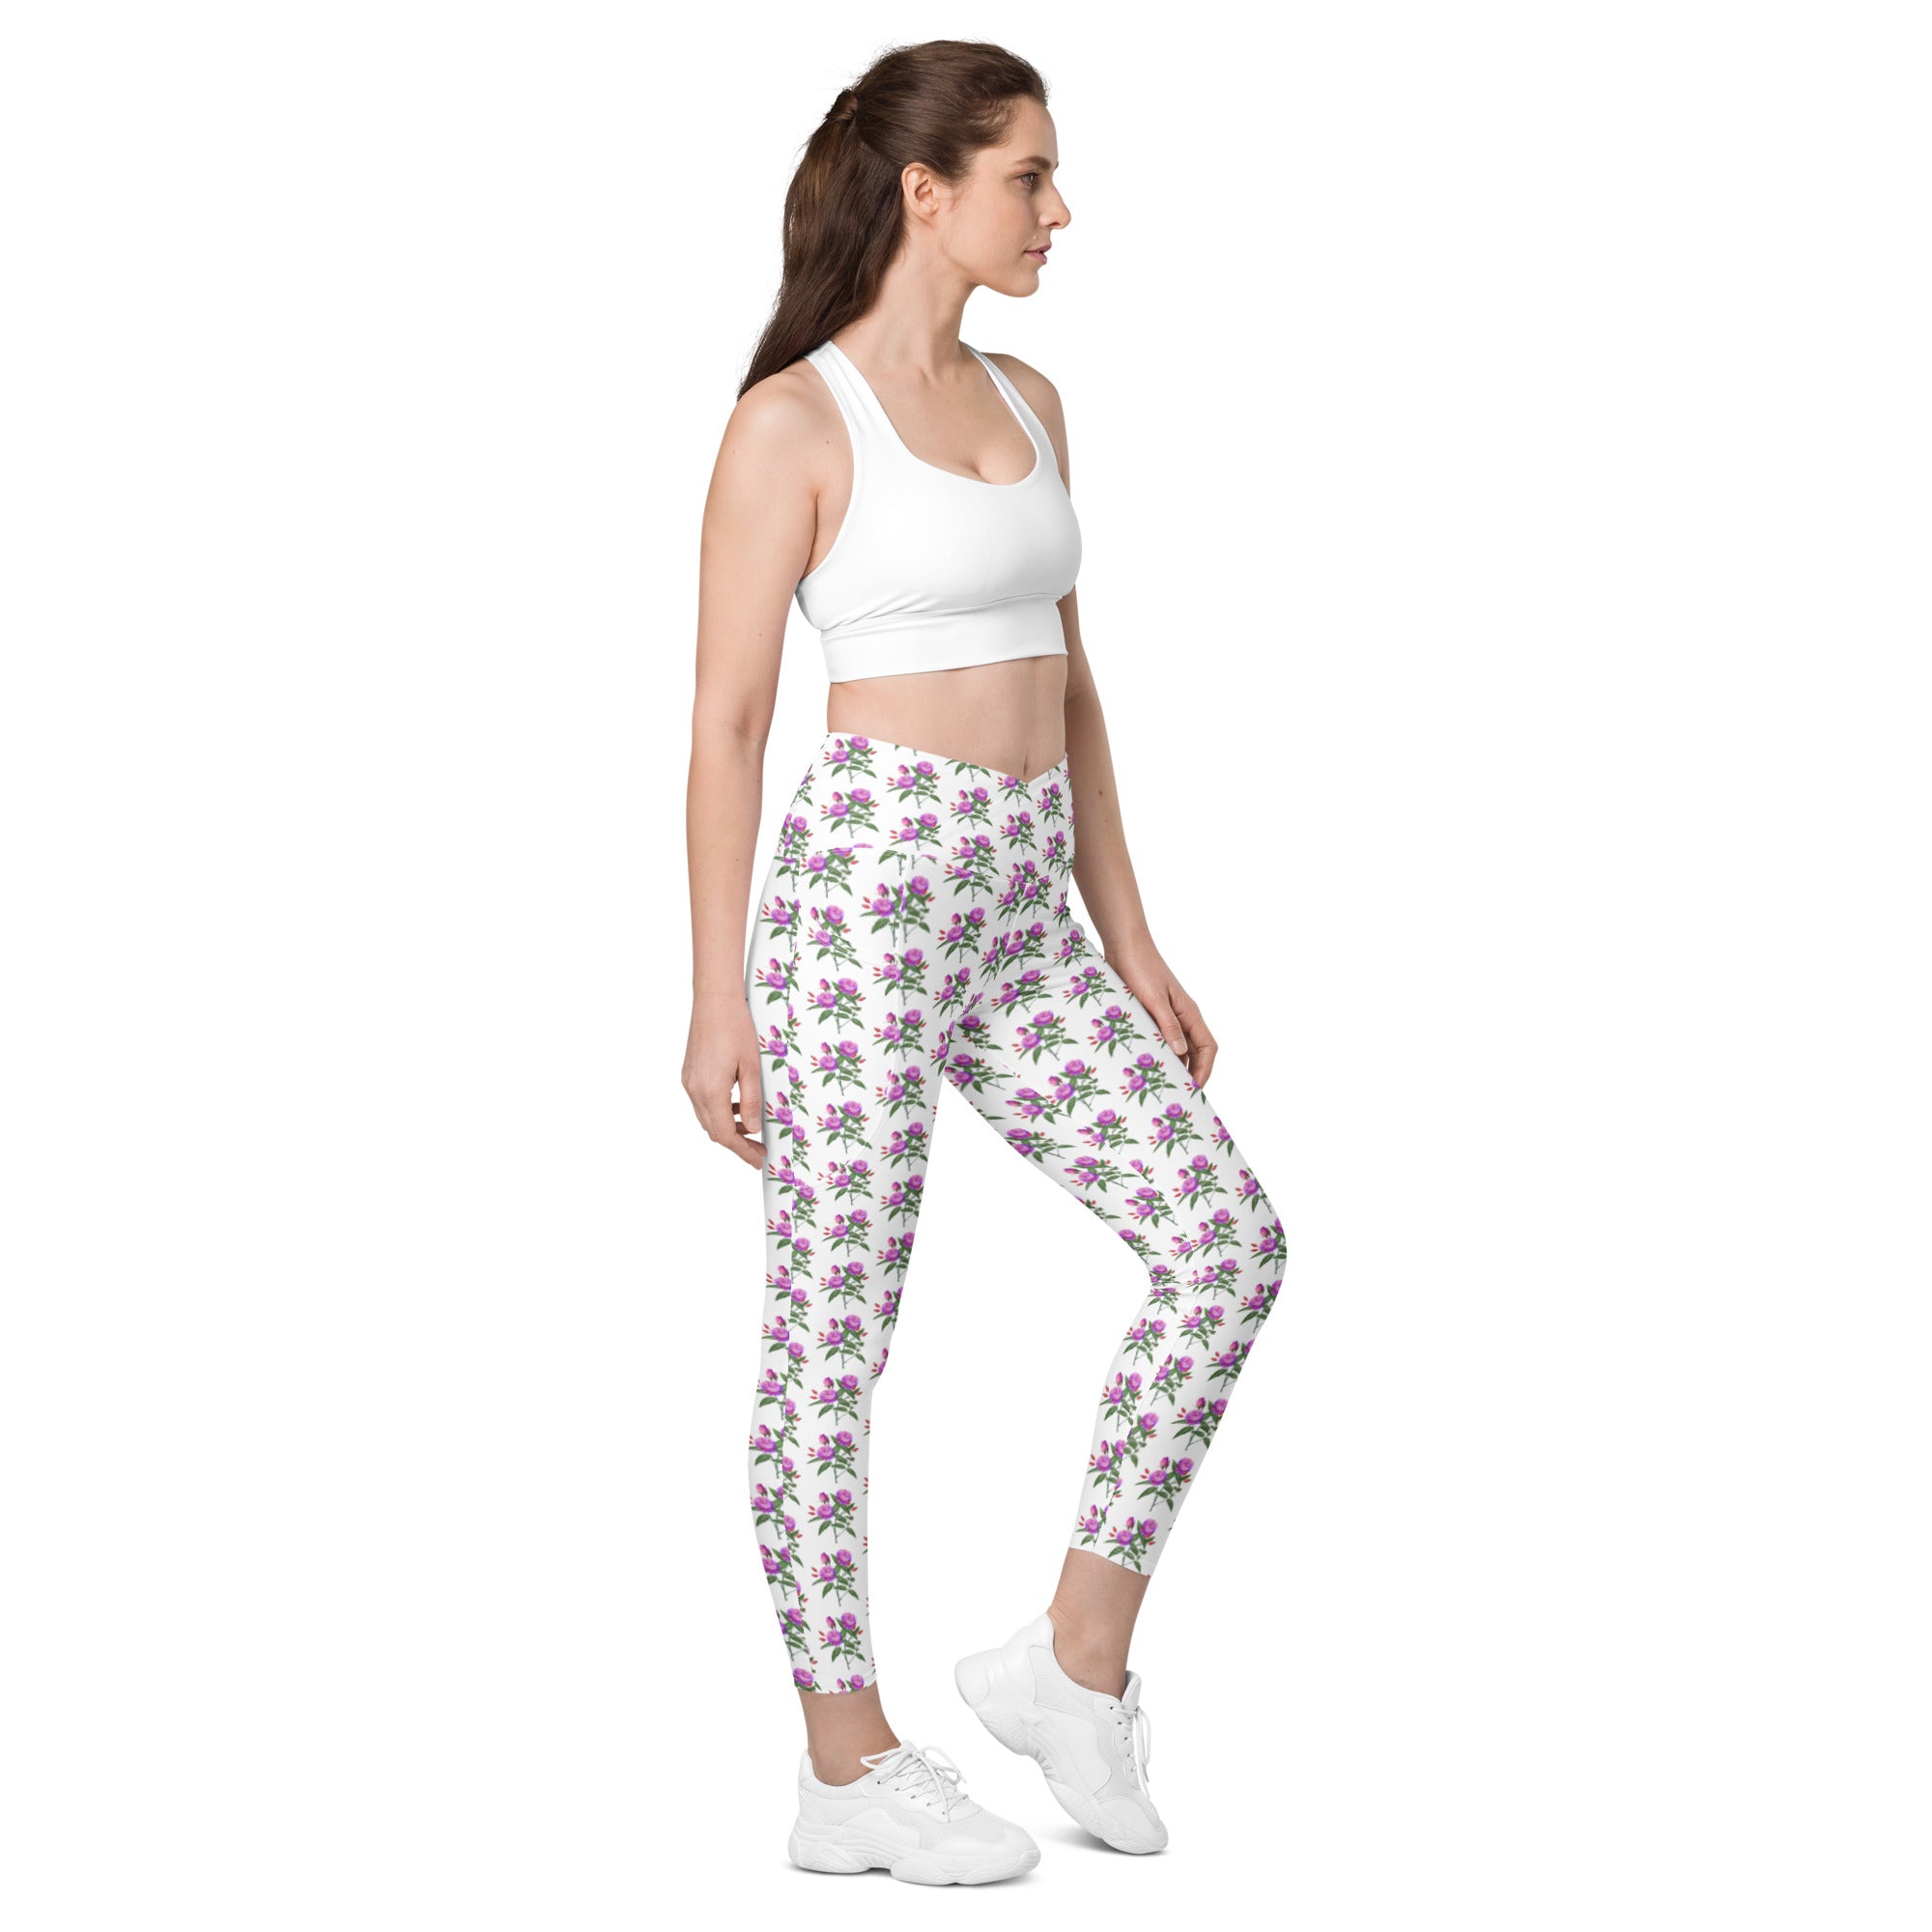 3D Printed Christmas Gym Leggings With Christmas Santa Claus, Snowflakes,  And Elk Designs Slim Fit Elastic Trousers For Fitness And Workouts From  Blackbirdy, $14.5 | DHgate.Com